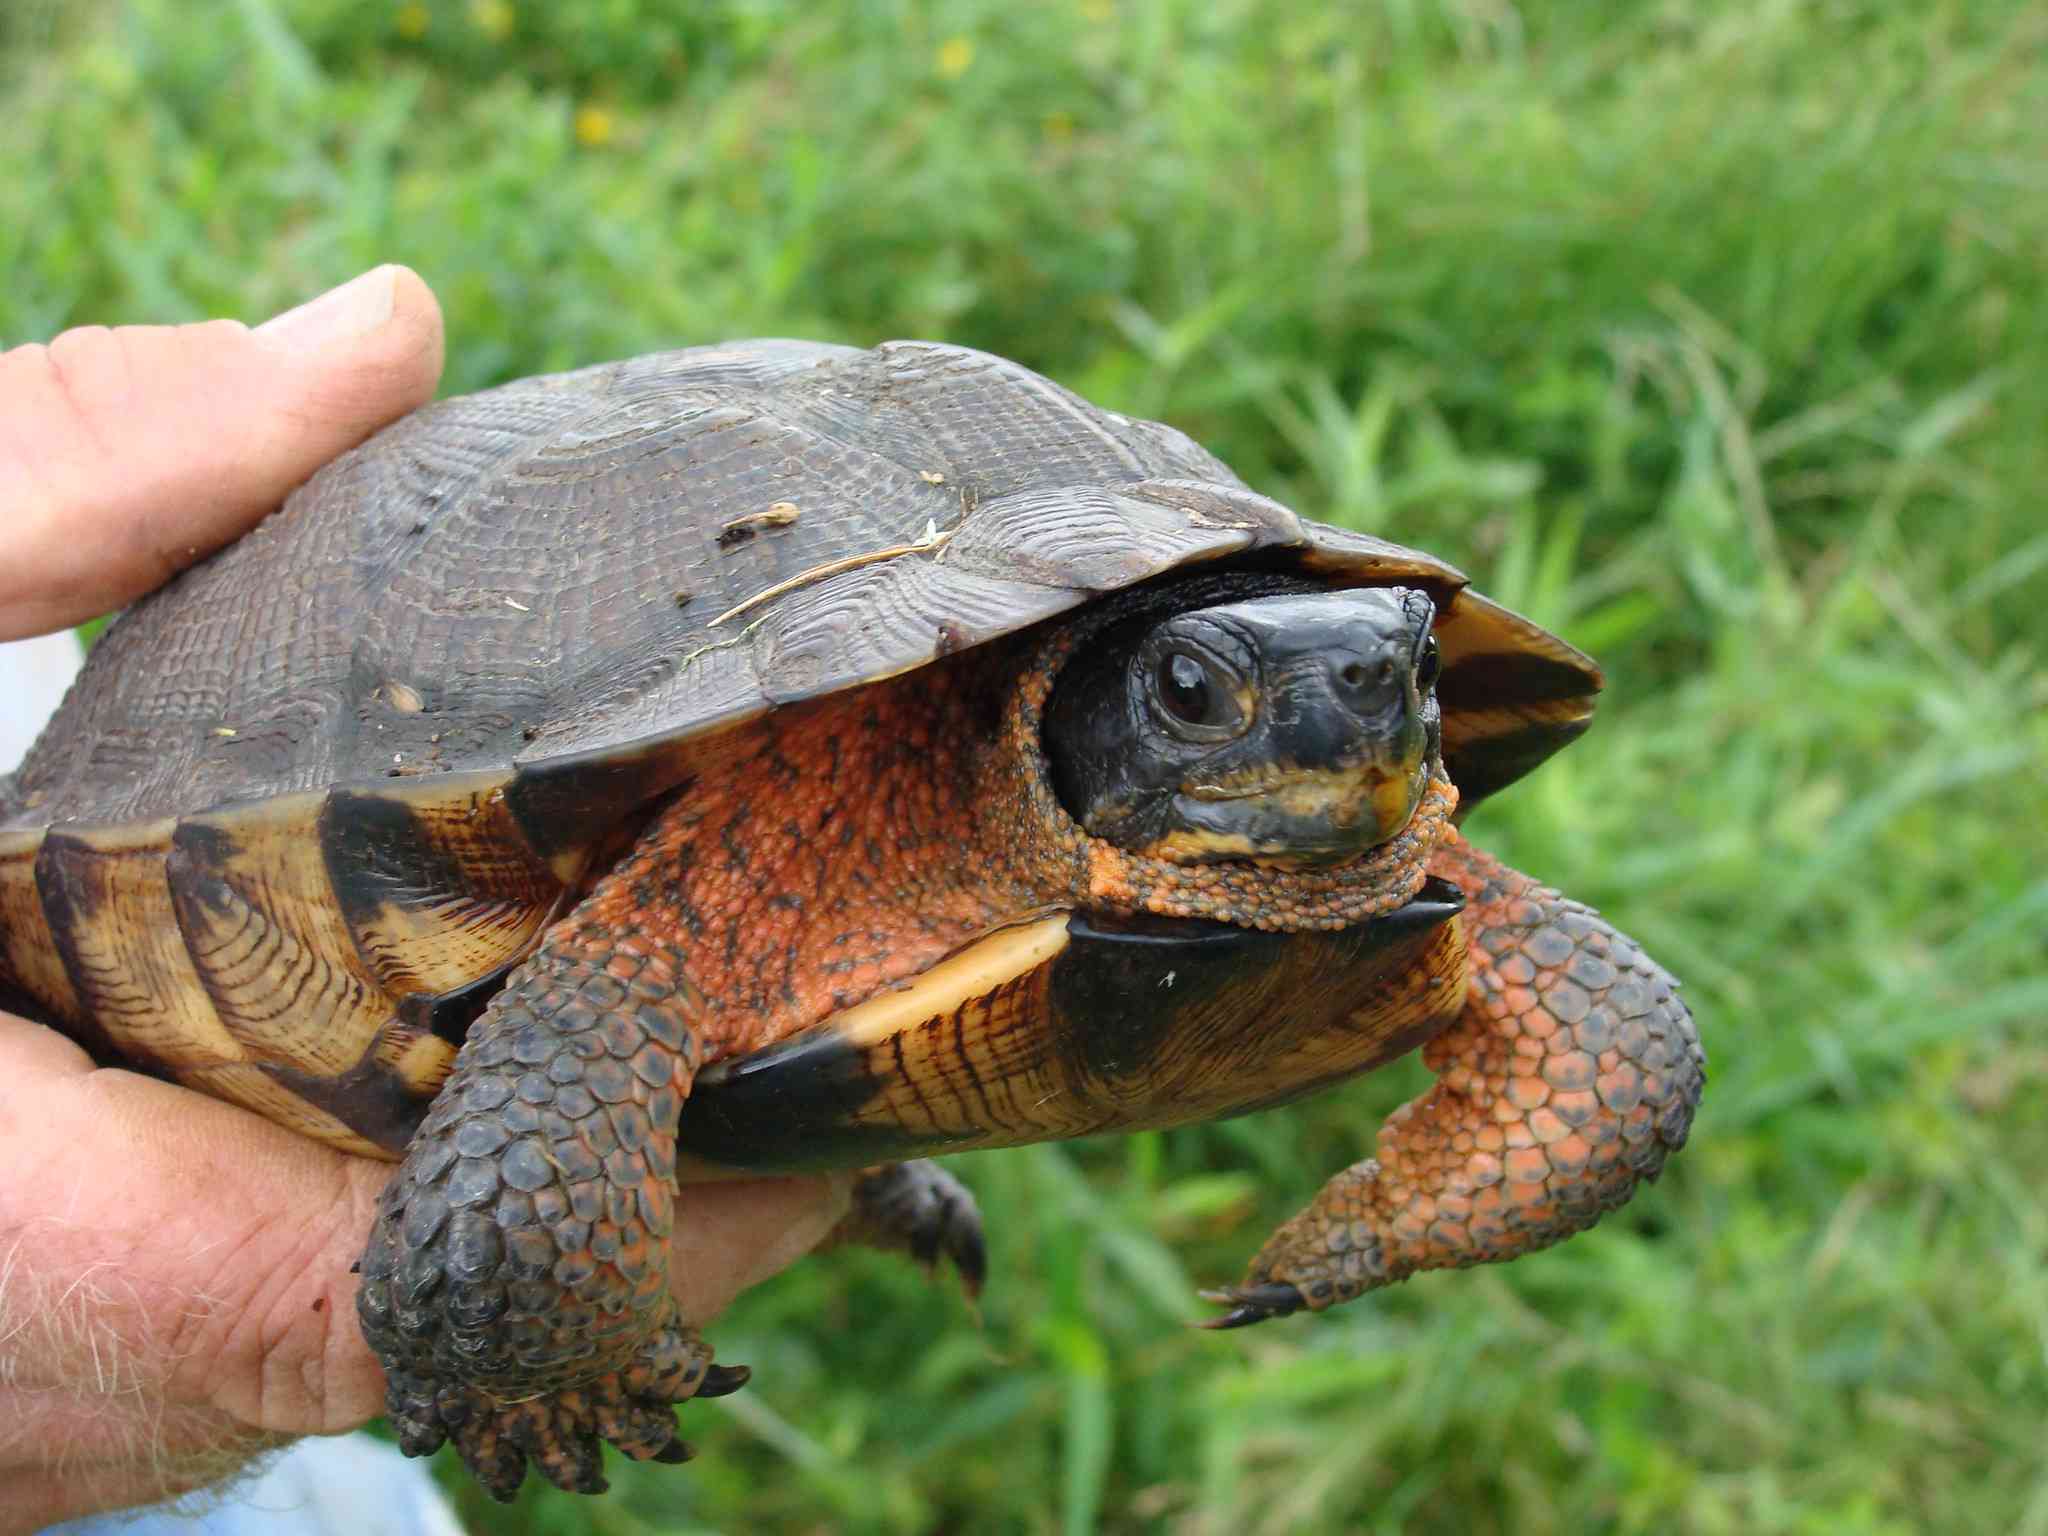 Wood Turtle being held above grass